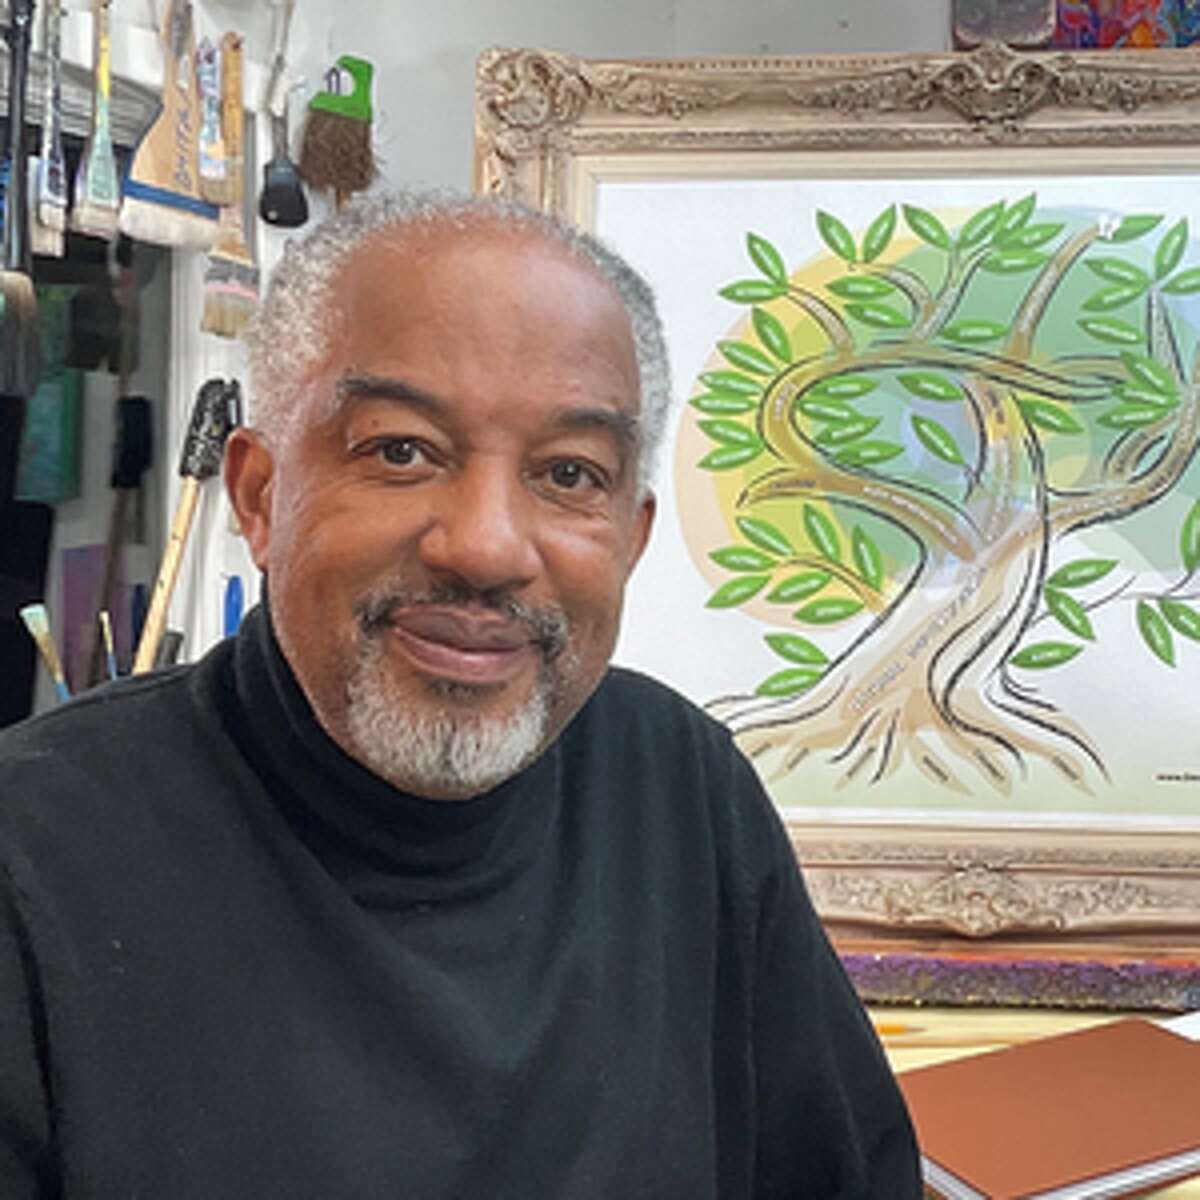 On Jan. 22, painter and inspirational educator Dmitri Wave Wright will give an in-person ARTalk at the Ridgefield Library in the library’s Main Program Room.